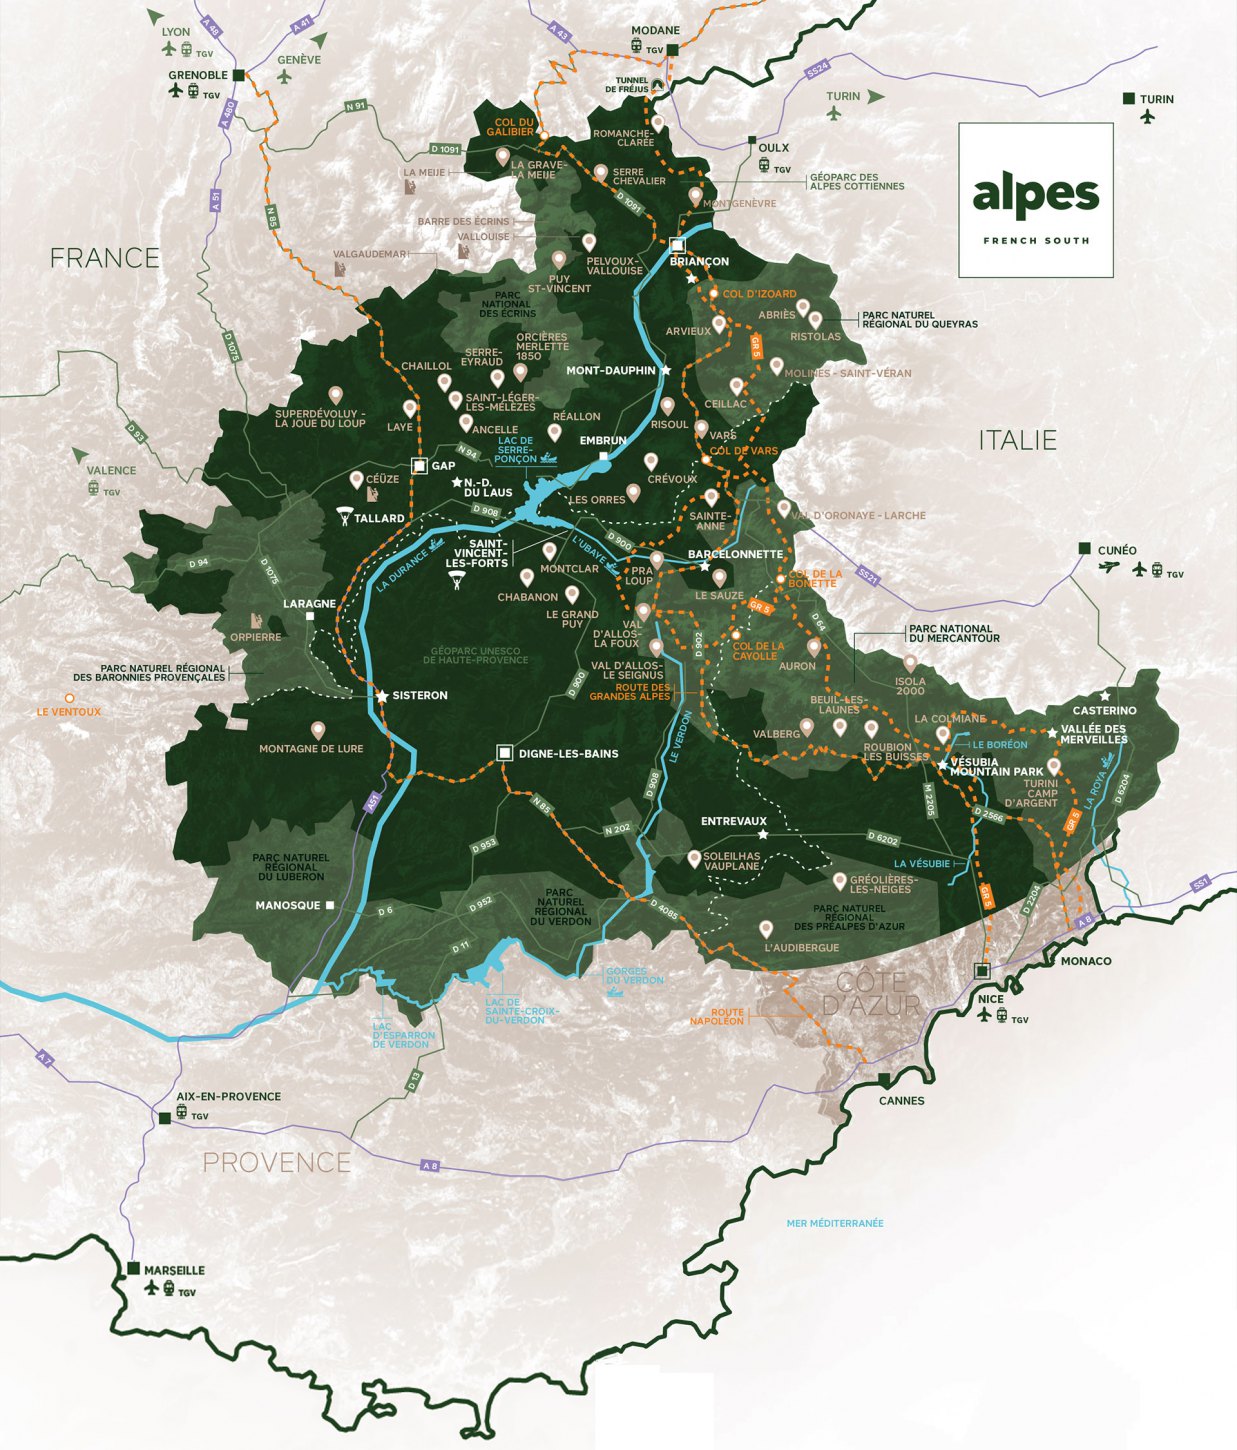 carte marque Alpes French South purealpes 